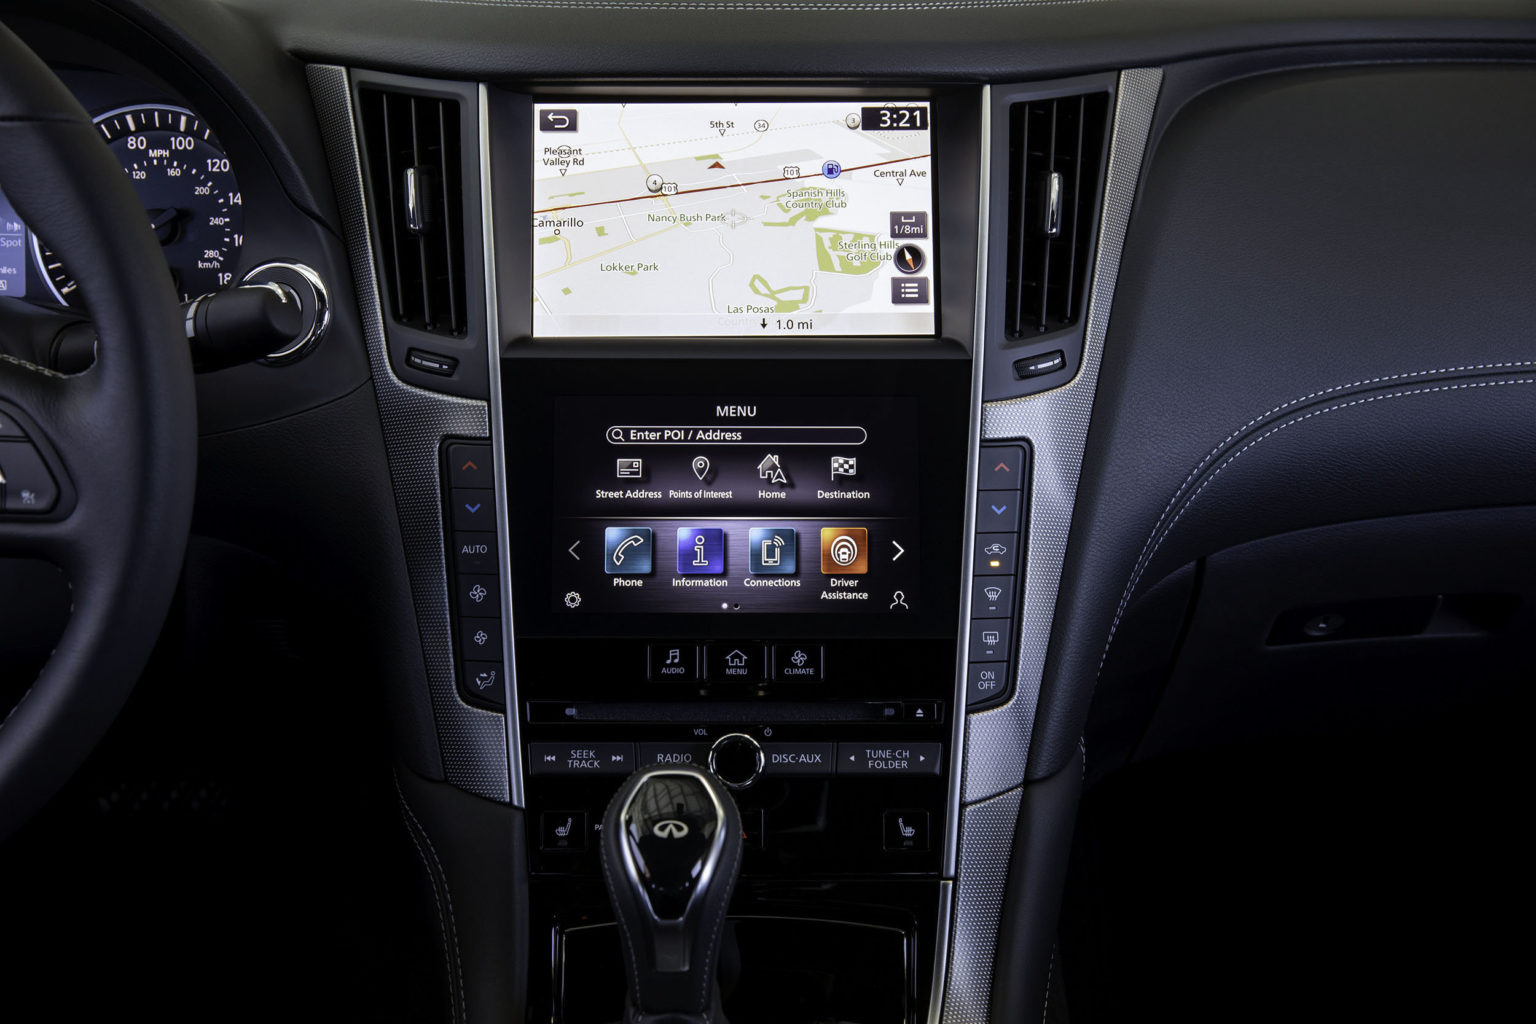 Infiniti has updated its key models with a new infotainment system for the 2020 model year.